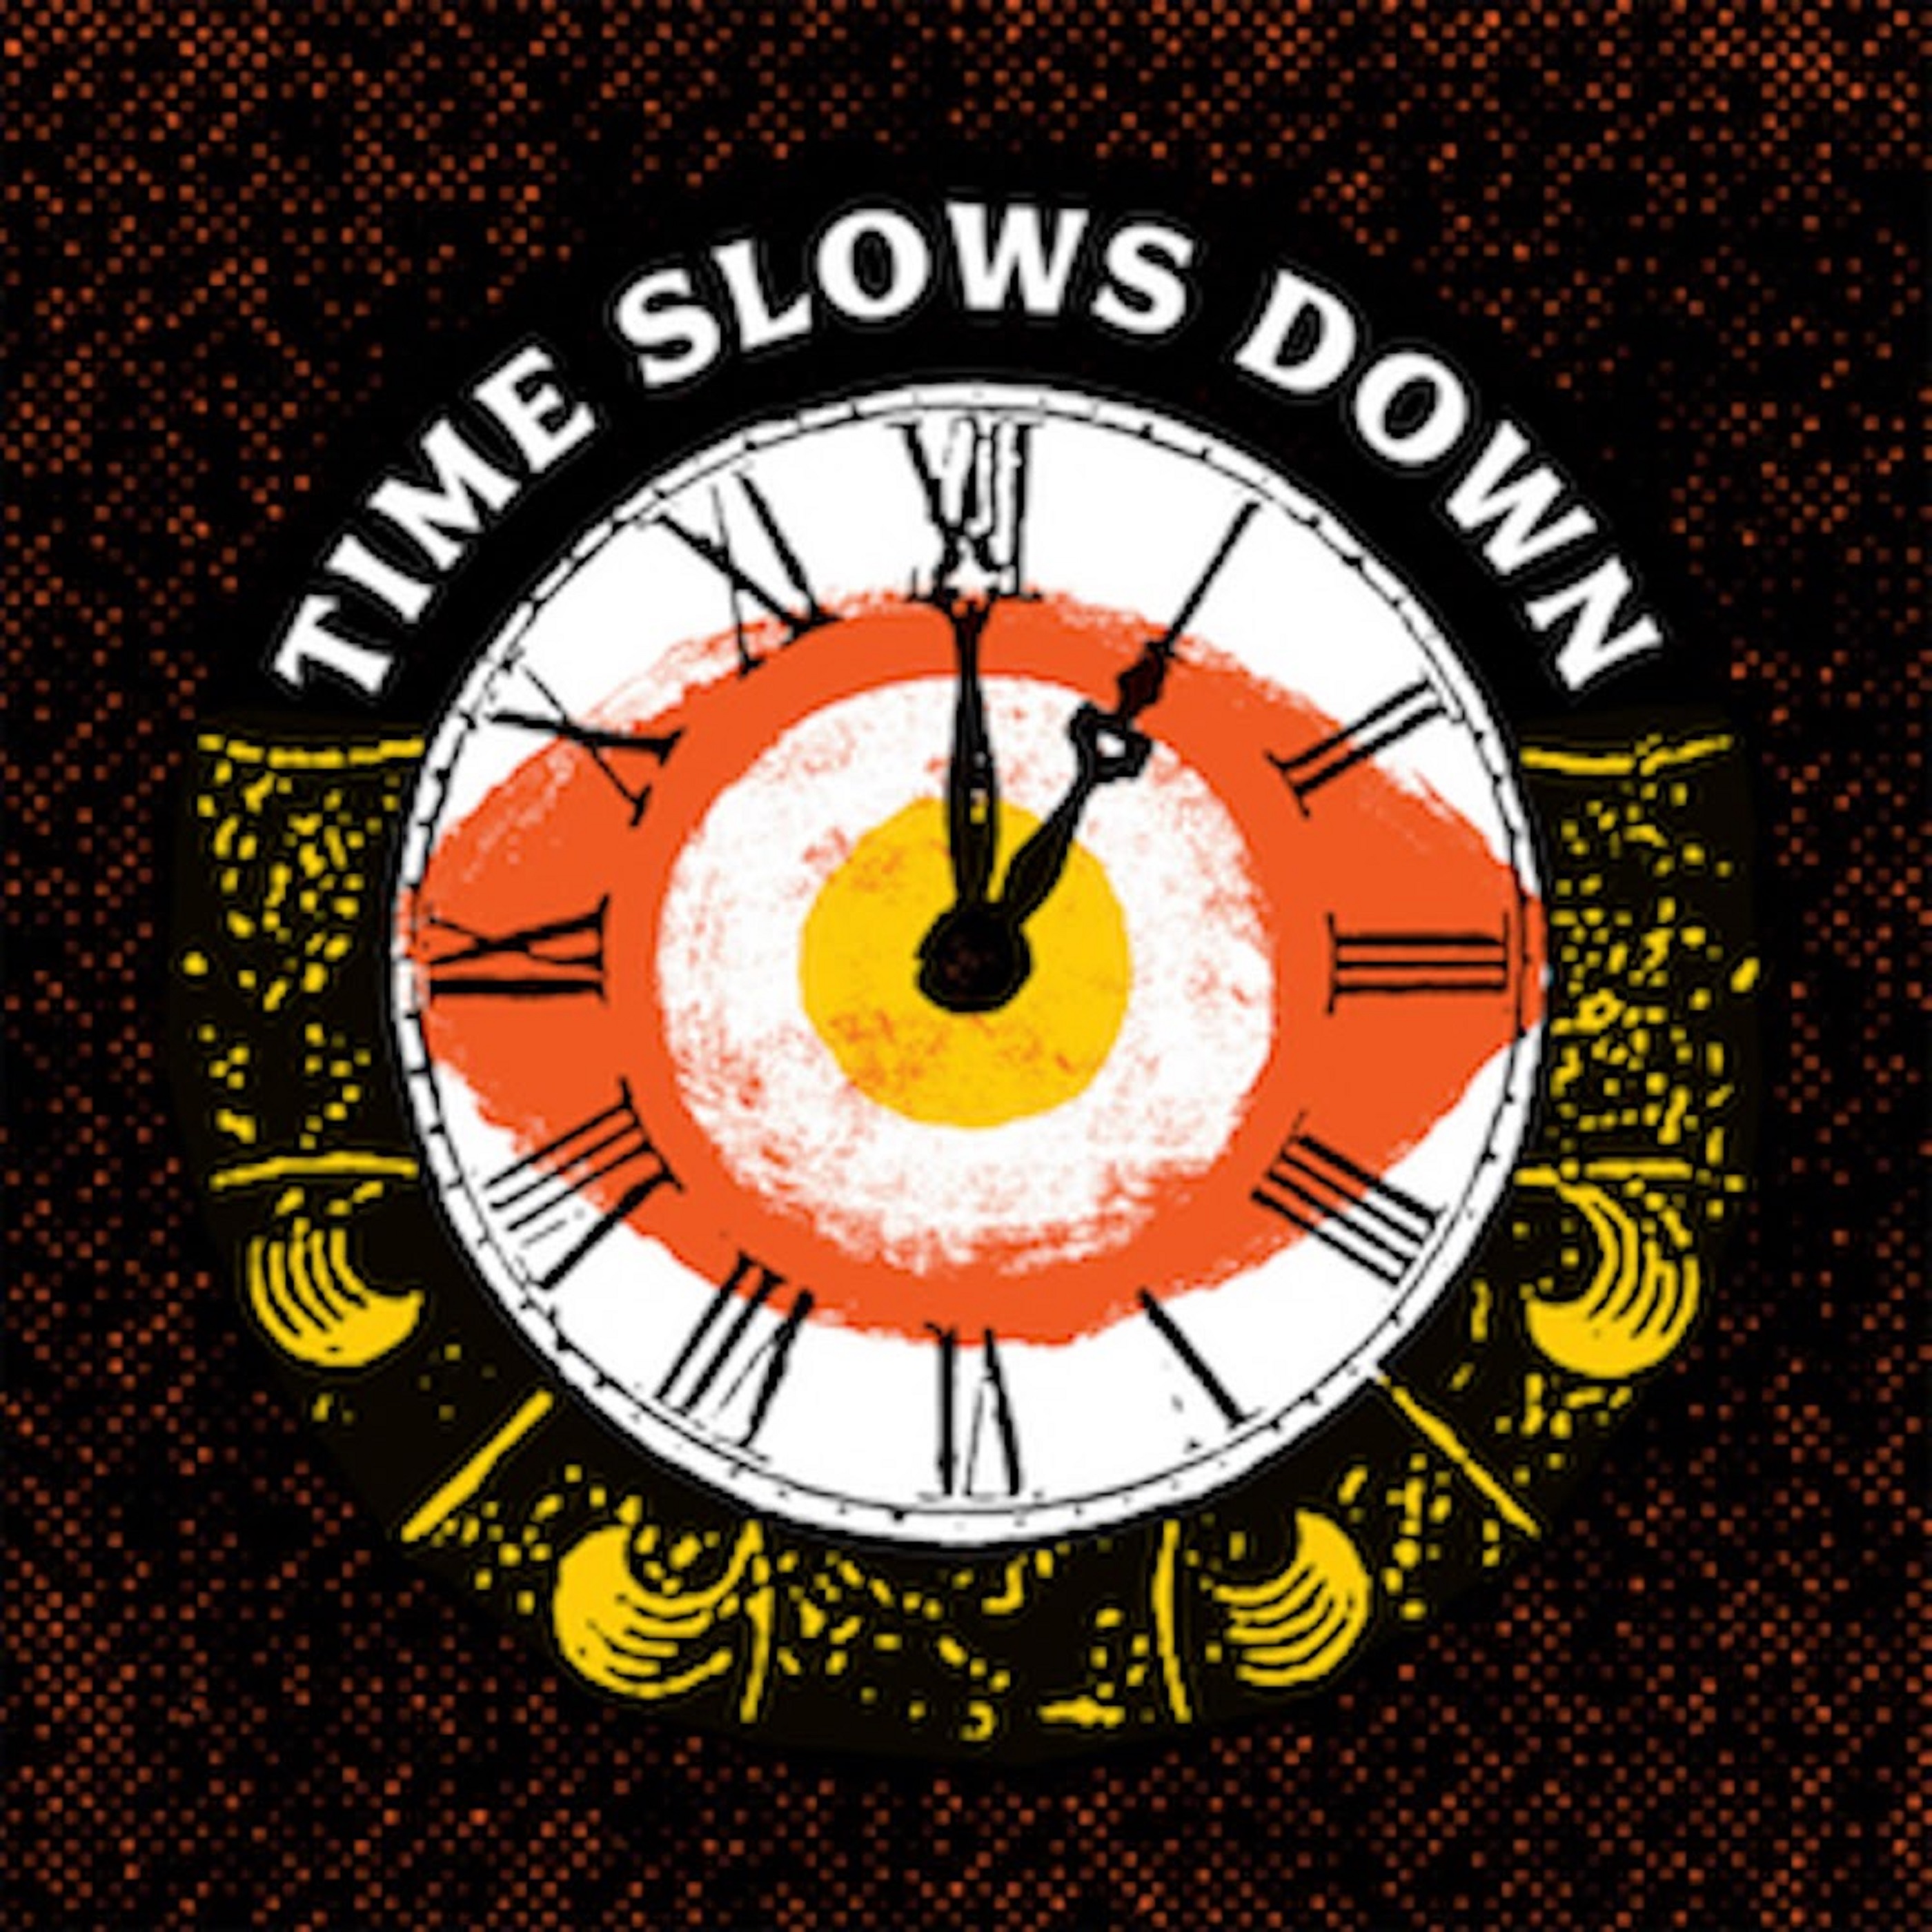 The Mighty Pines newest single "Time Slows Down"